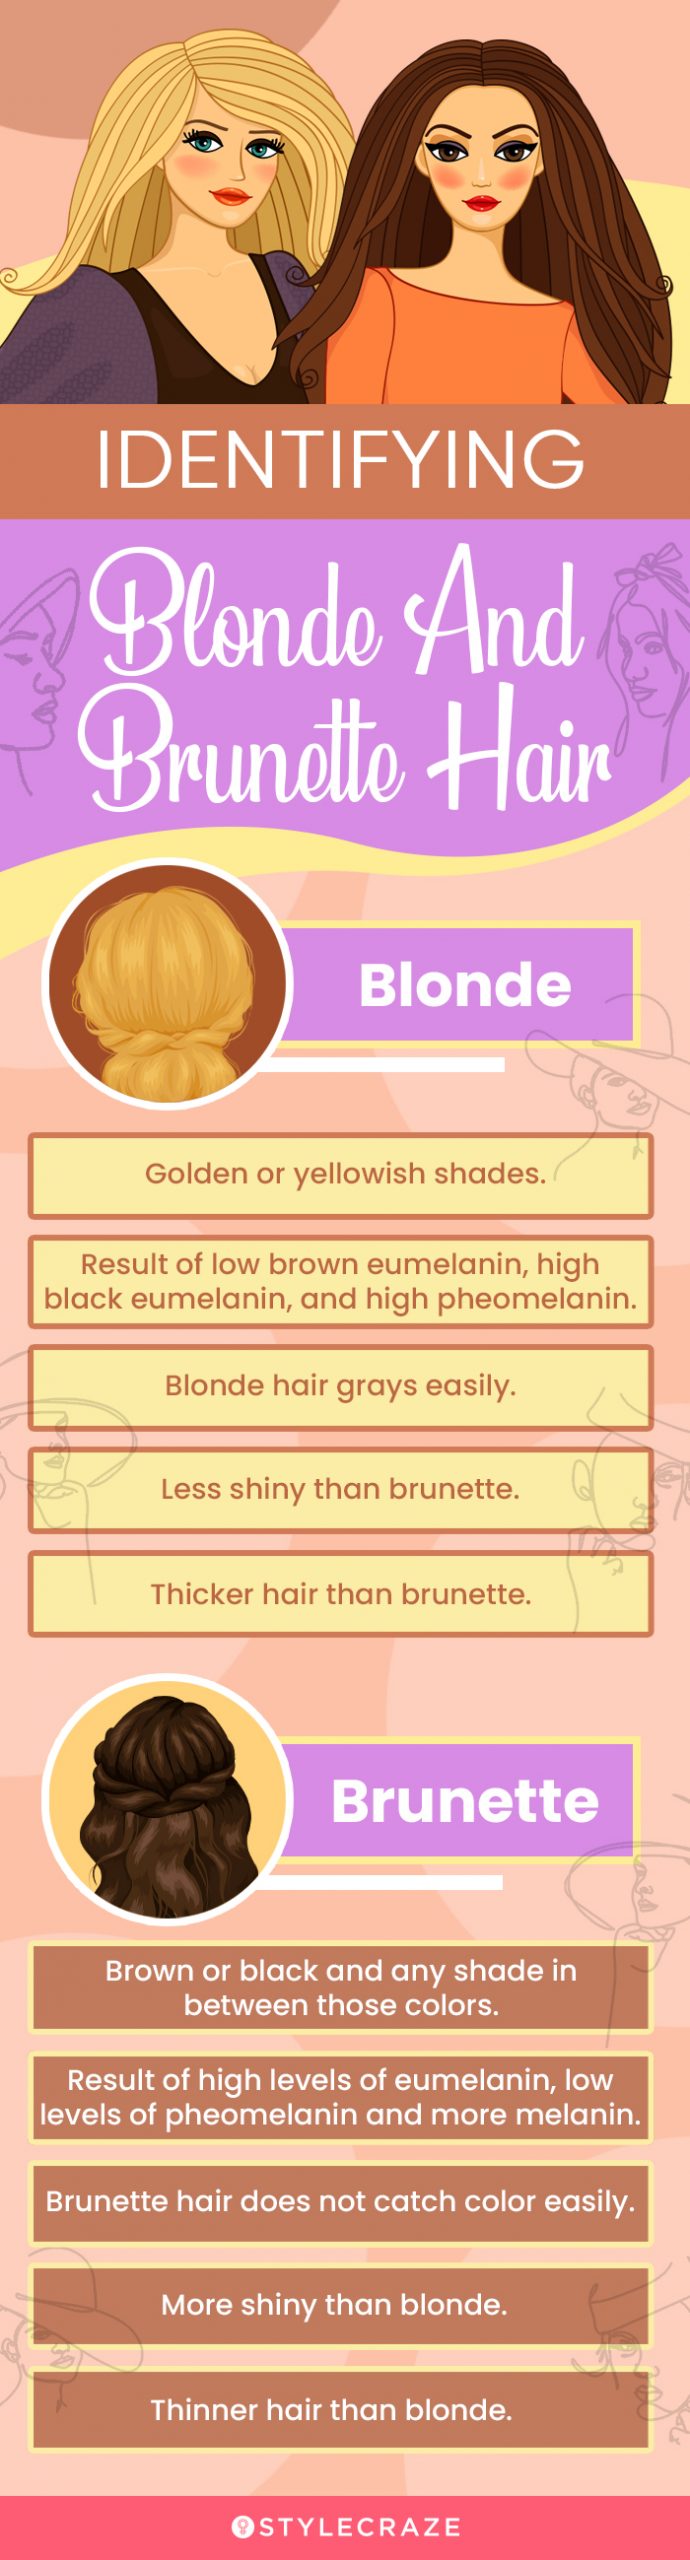 identifying blonde and brunette hair (infographic)